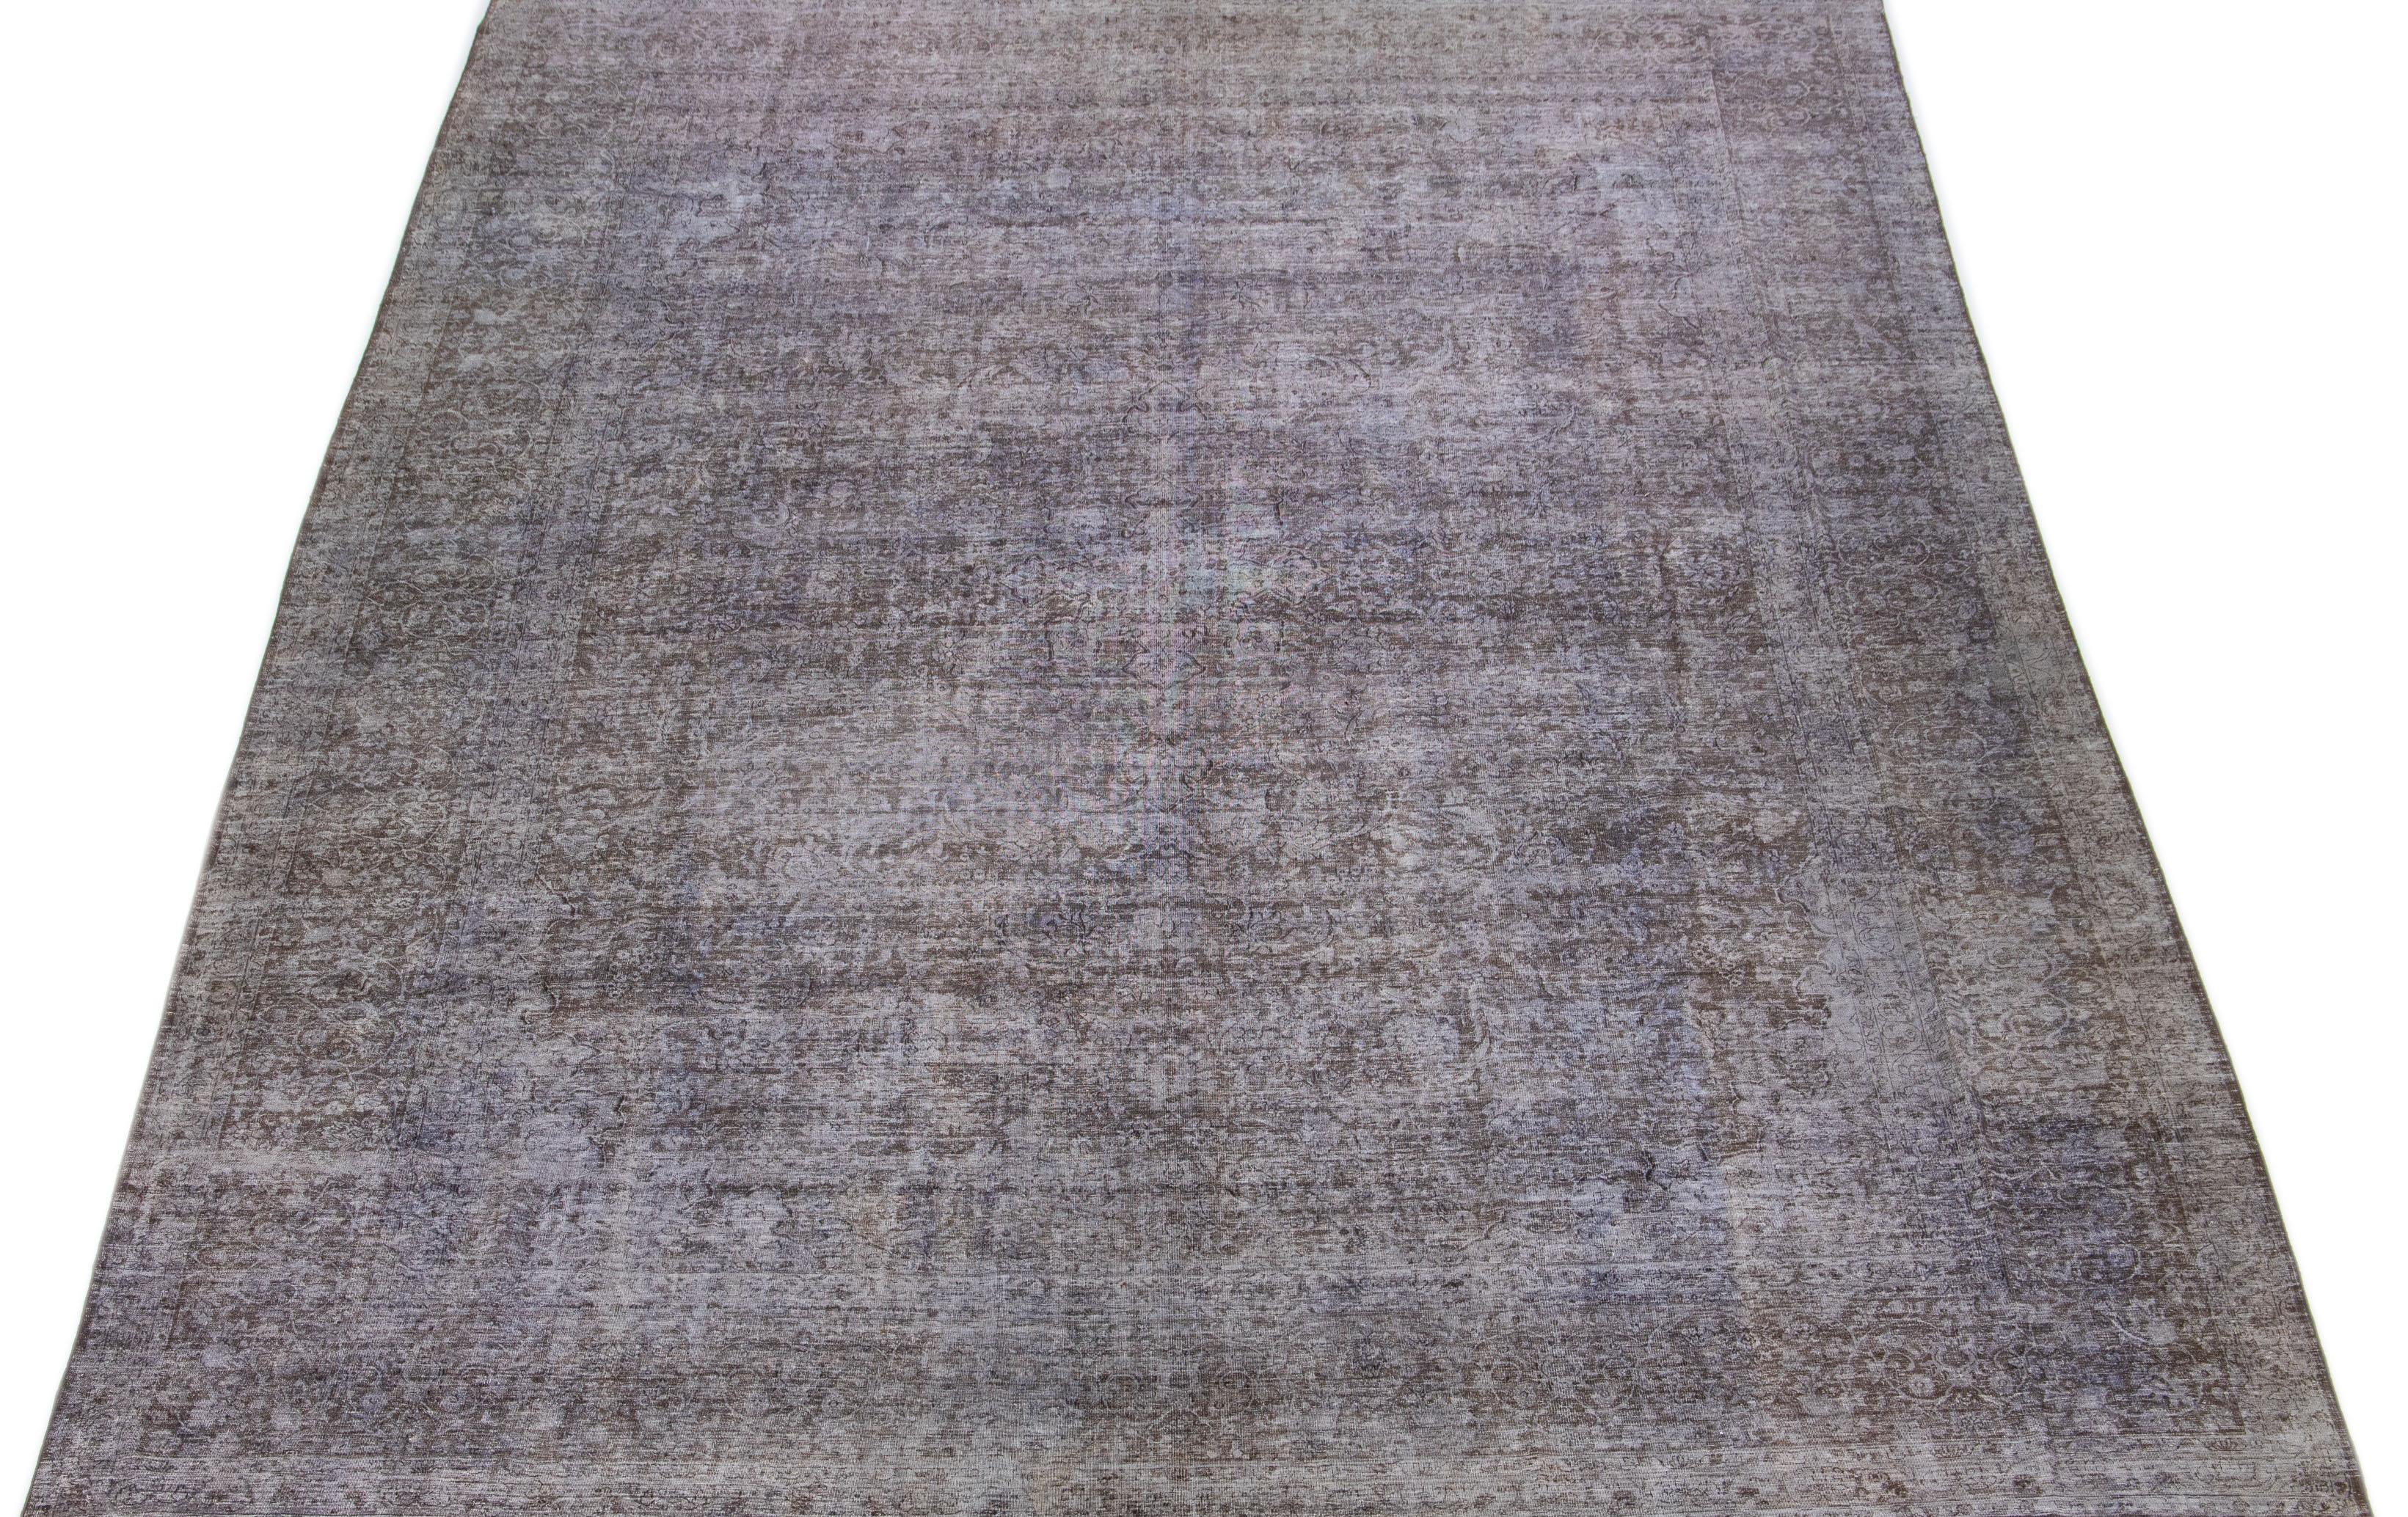 This 1950s Persian rug showcases an elaborate brown floral design that has been purposely distressed and dyed to create a charming rustic effect. The rug's exquisite gray hue lends an air of elegance and refinement to any room it graces.

This rug